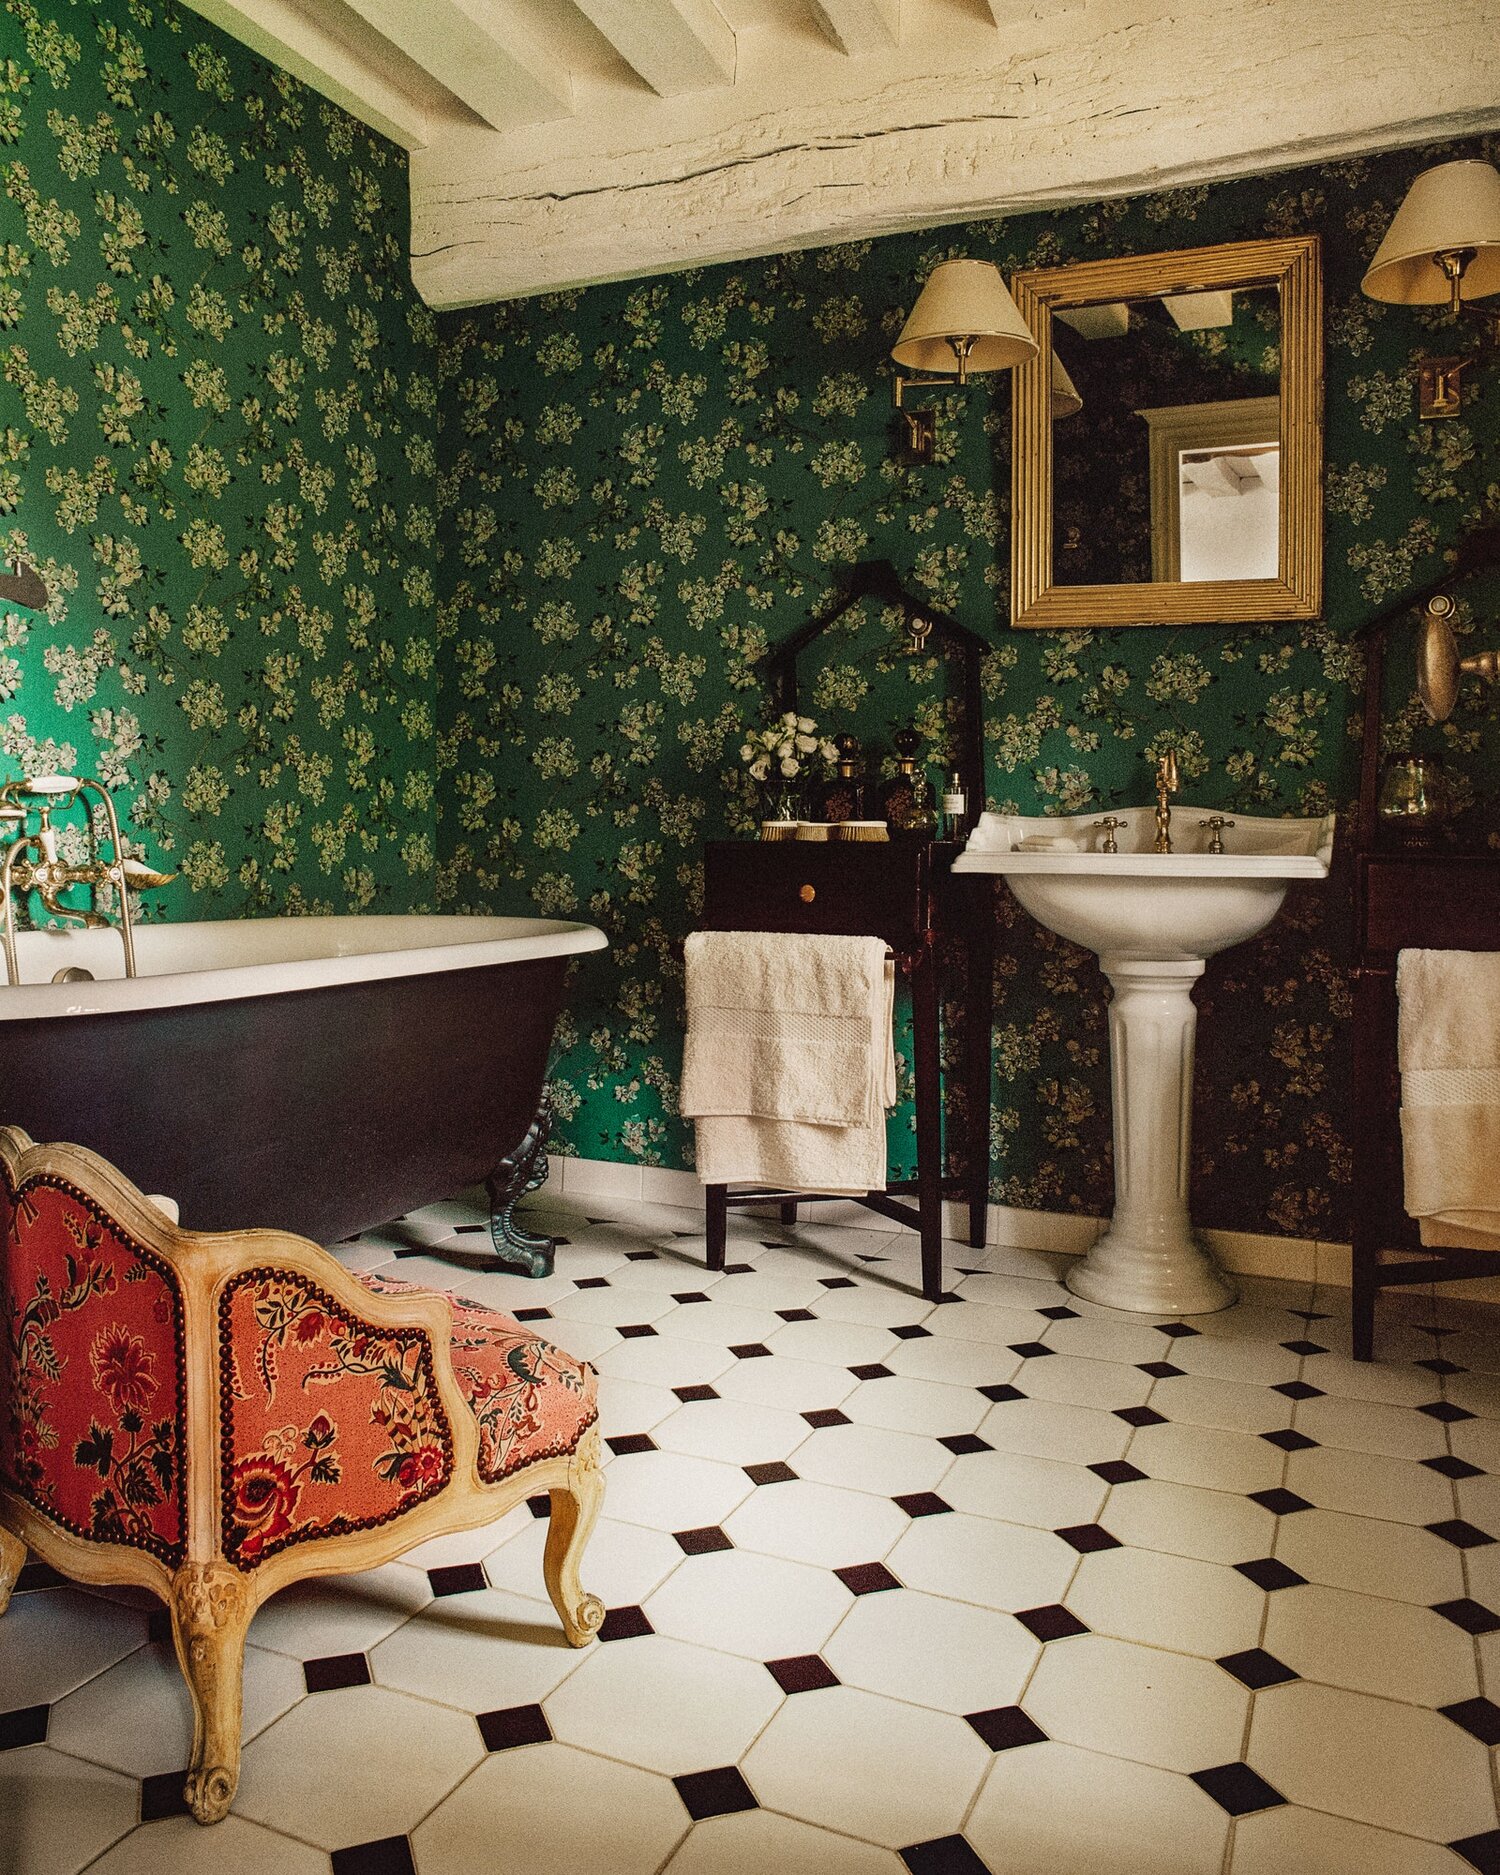 I just adore this bathroom with the green wall covering and mix of antiques. I always say that a bathroom should feel inviting and not clinical.